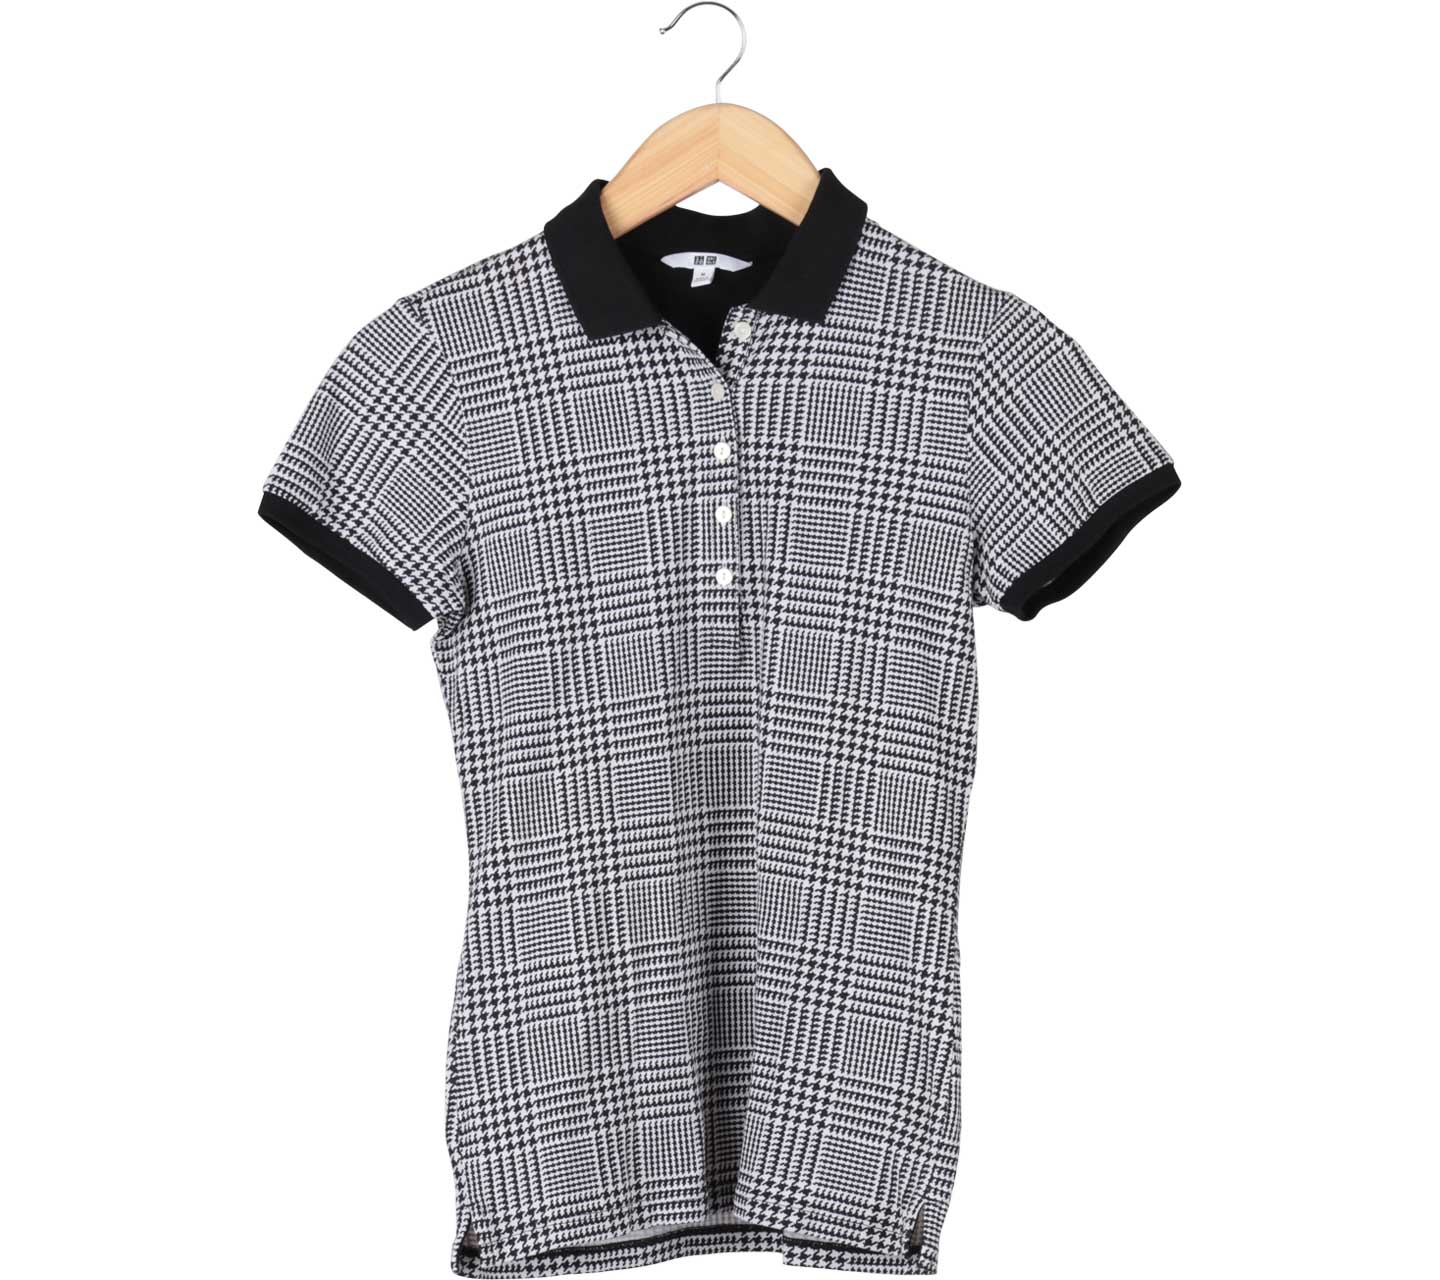 UNIQLO Black And White Houndstooth T-Shirt